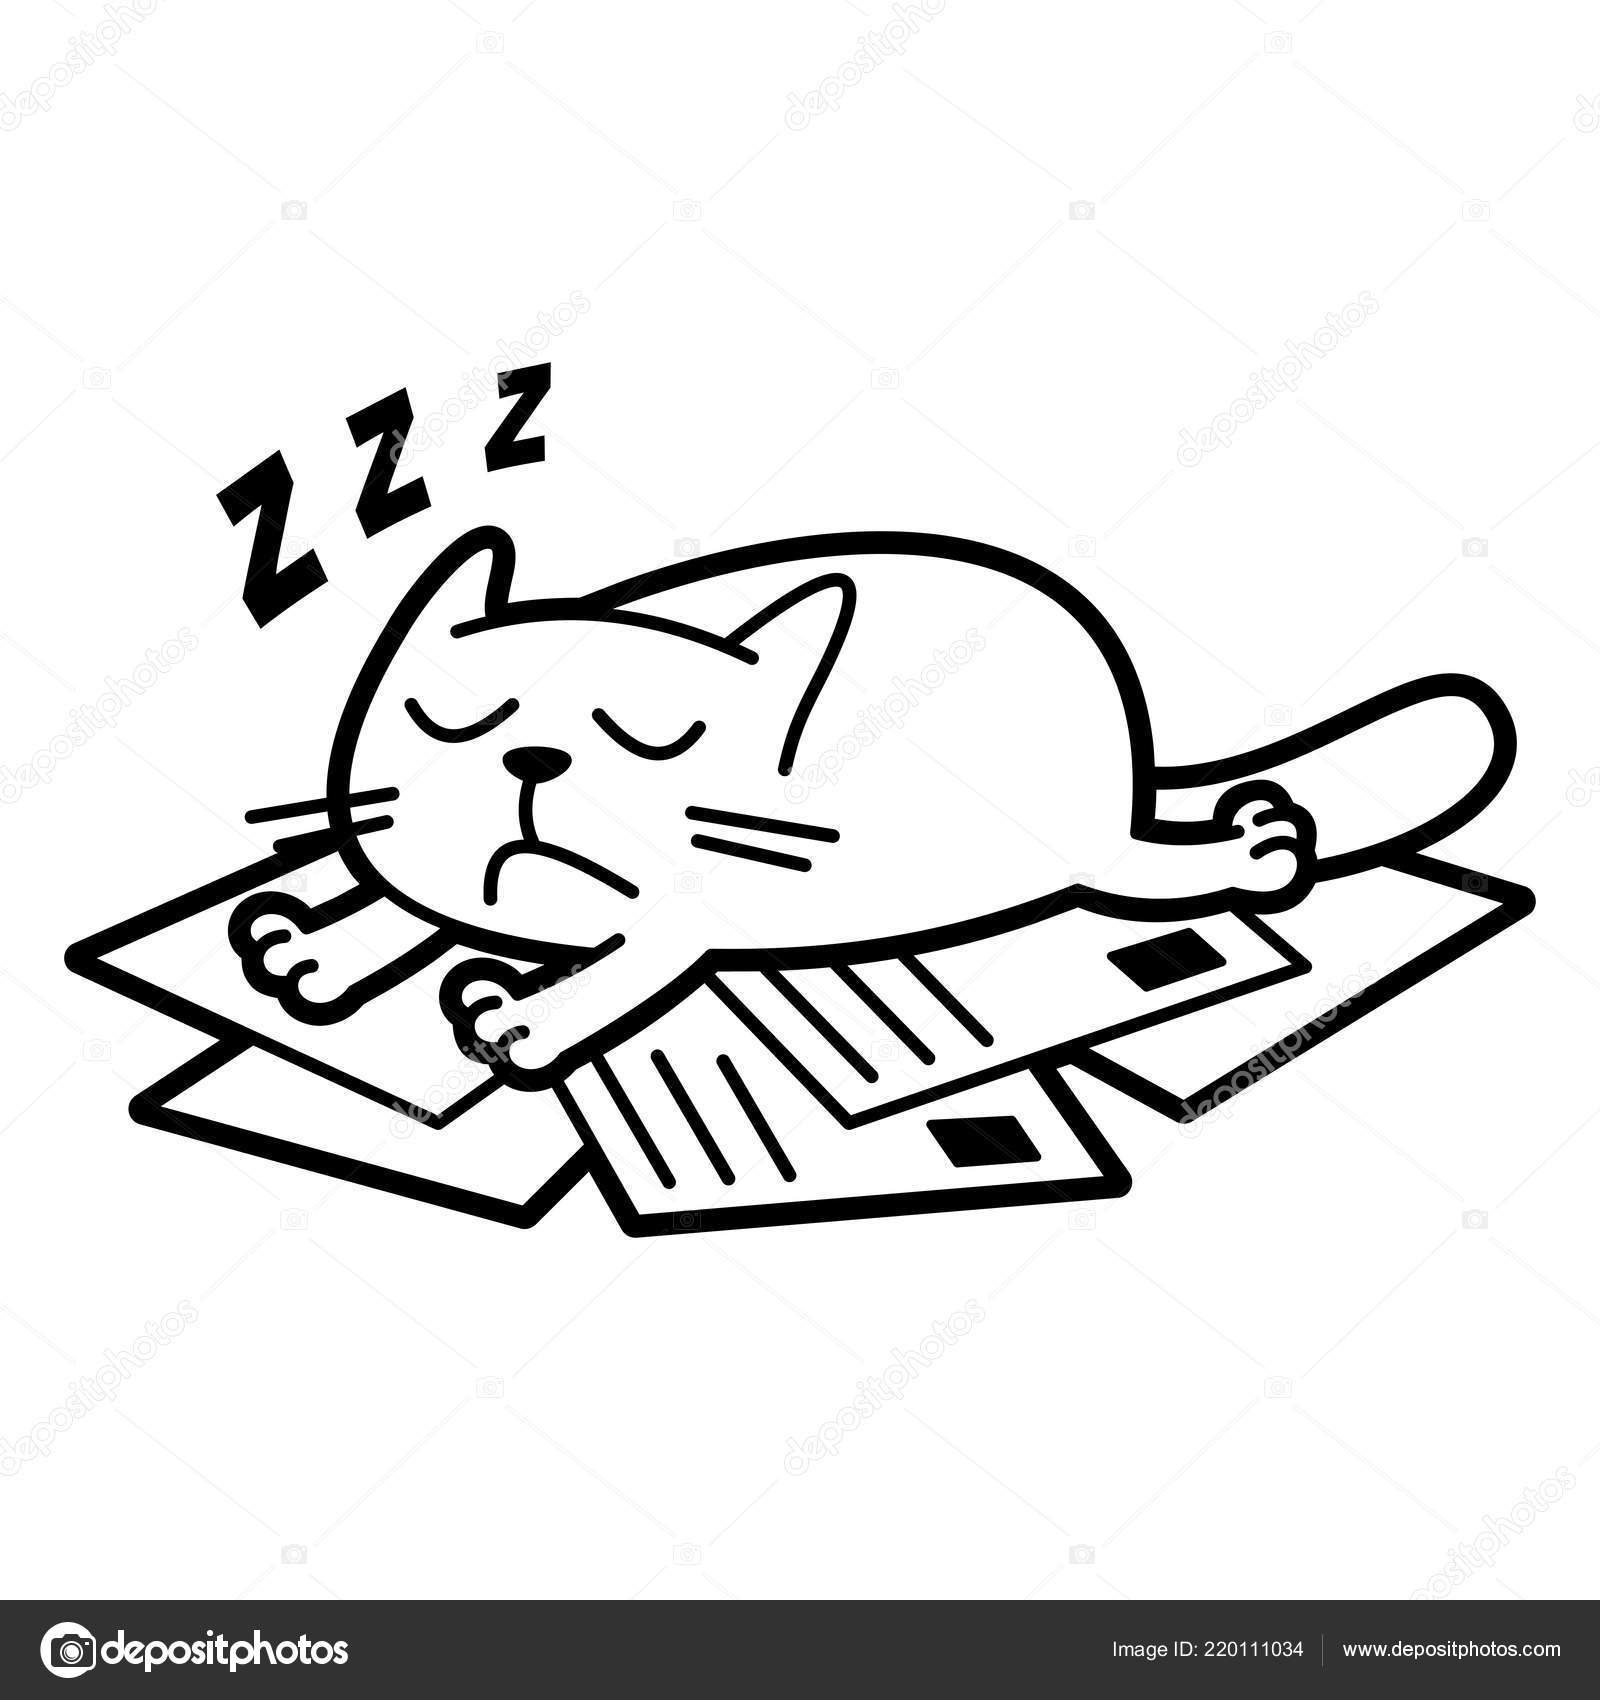 Hard Hat Coloring Page Cat Cartoon Character Coloring Page Black And White Stock Vector